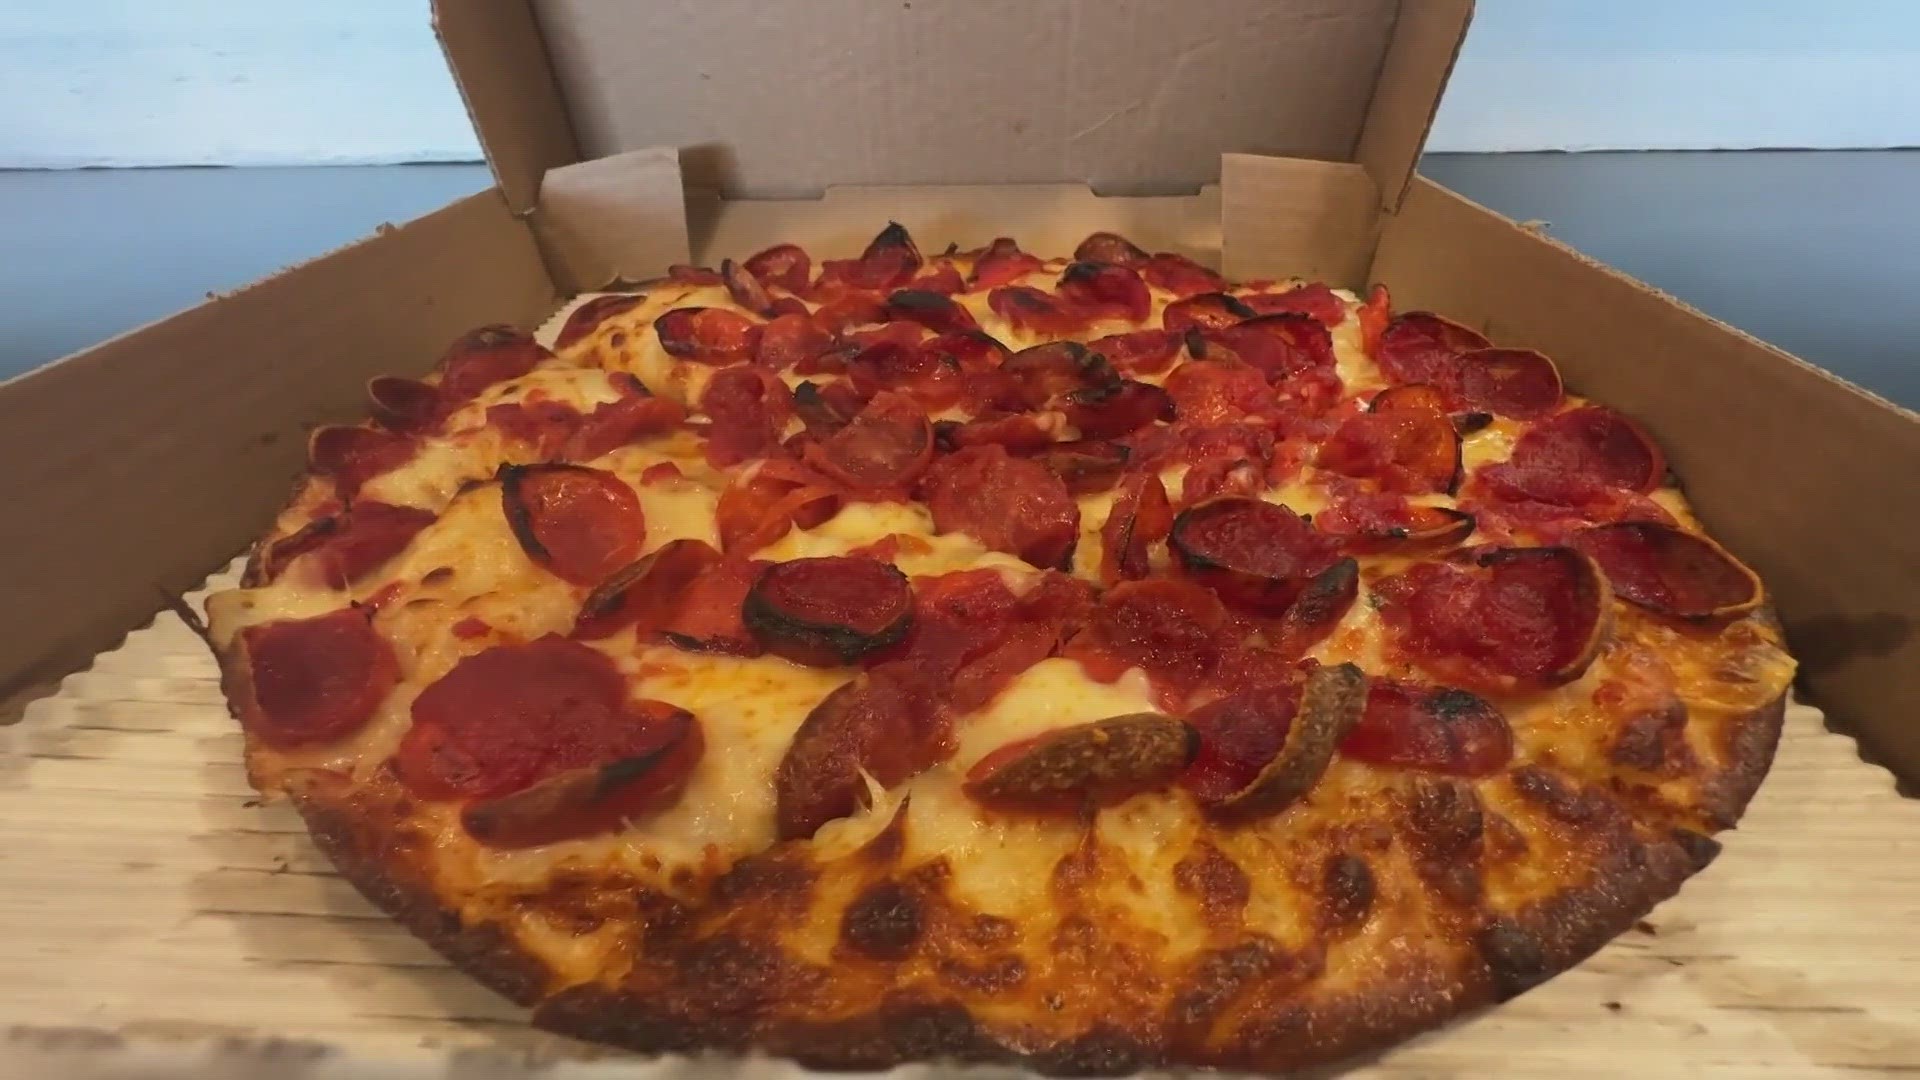 Hungry? You will be! Check out the secrets to this special pizza from the Ohio Pie Co. in Brunswick.